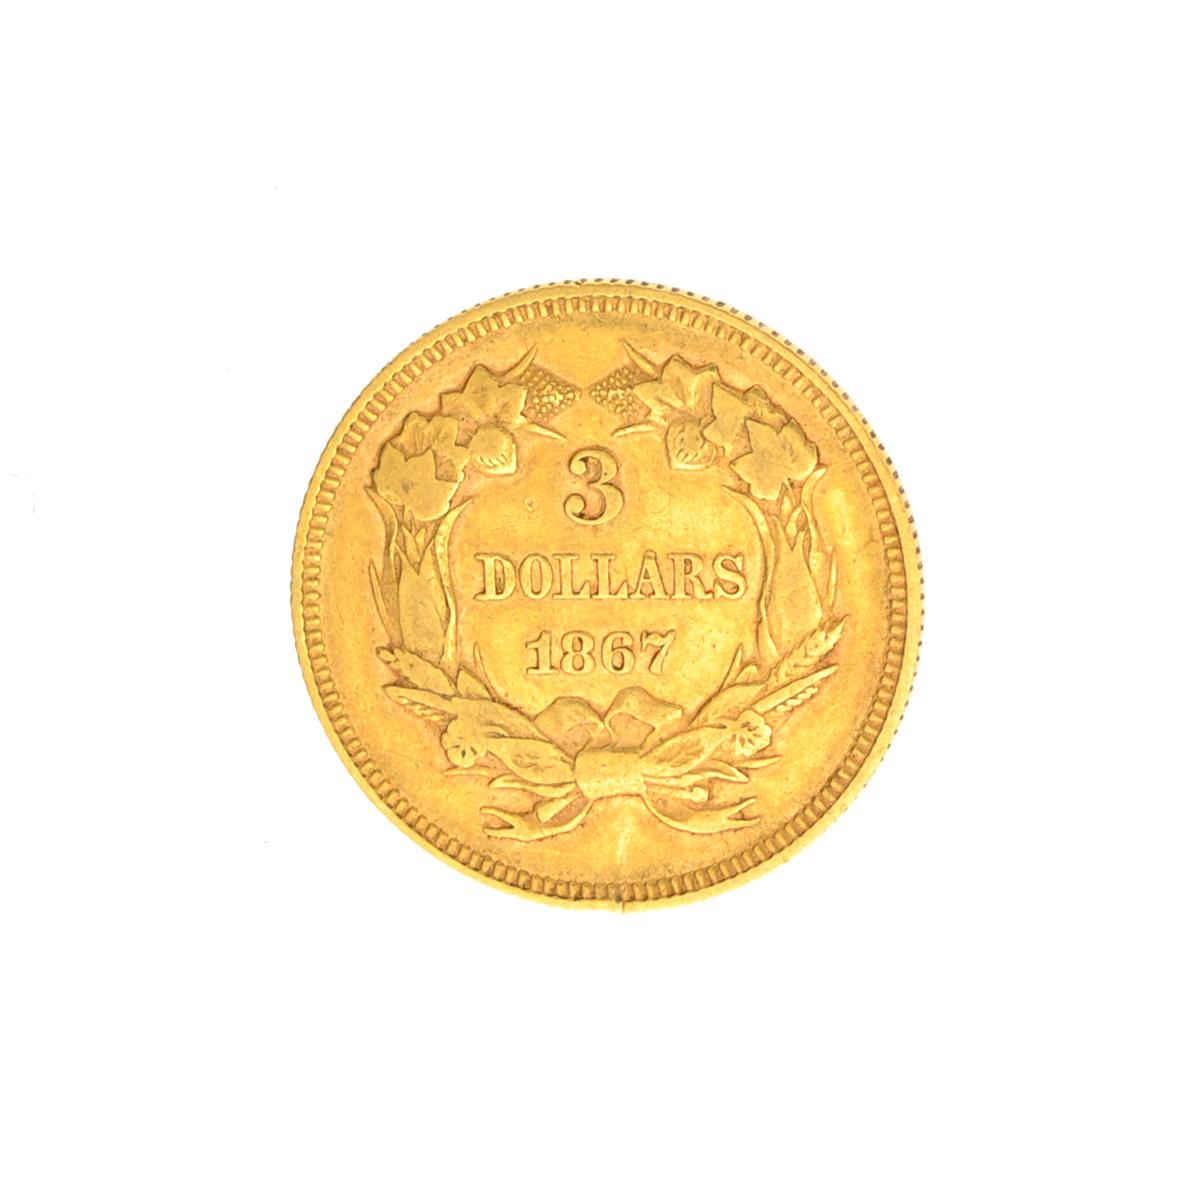 Very Rare 1867 $3 U.S. Princess Low Mintage Damage Gold Coin Great Investment